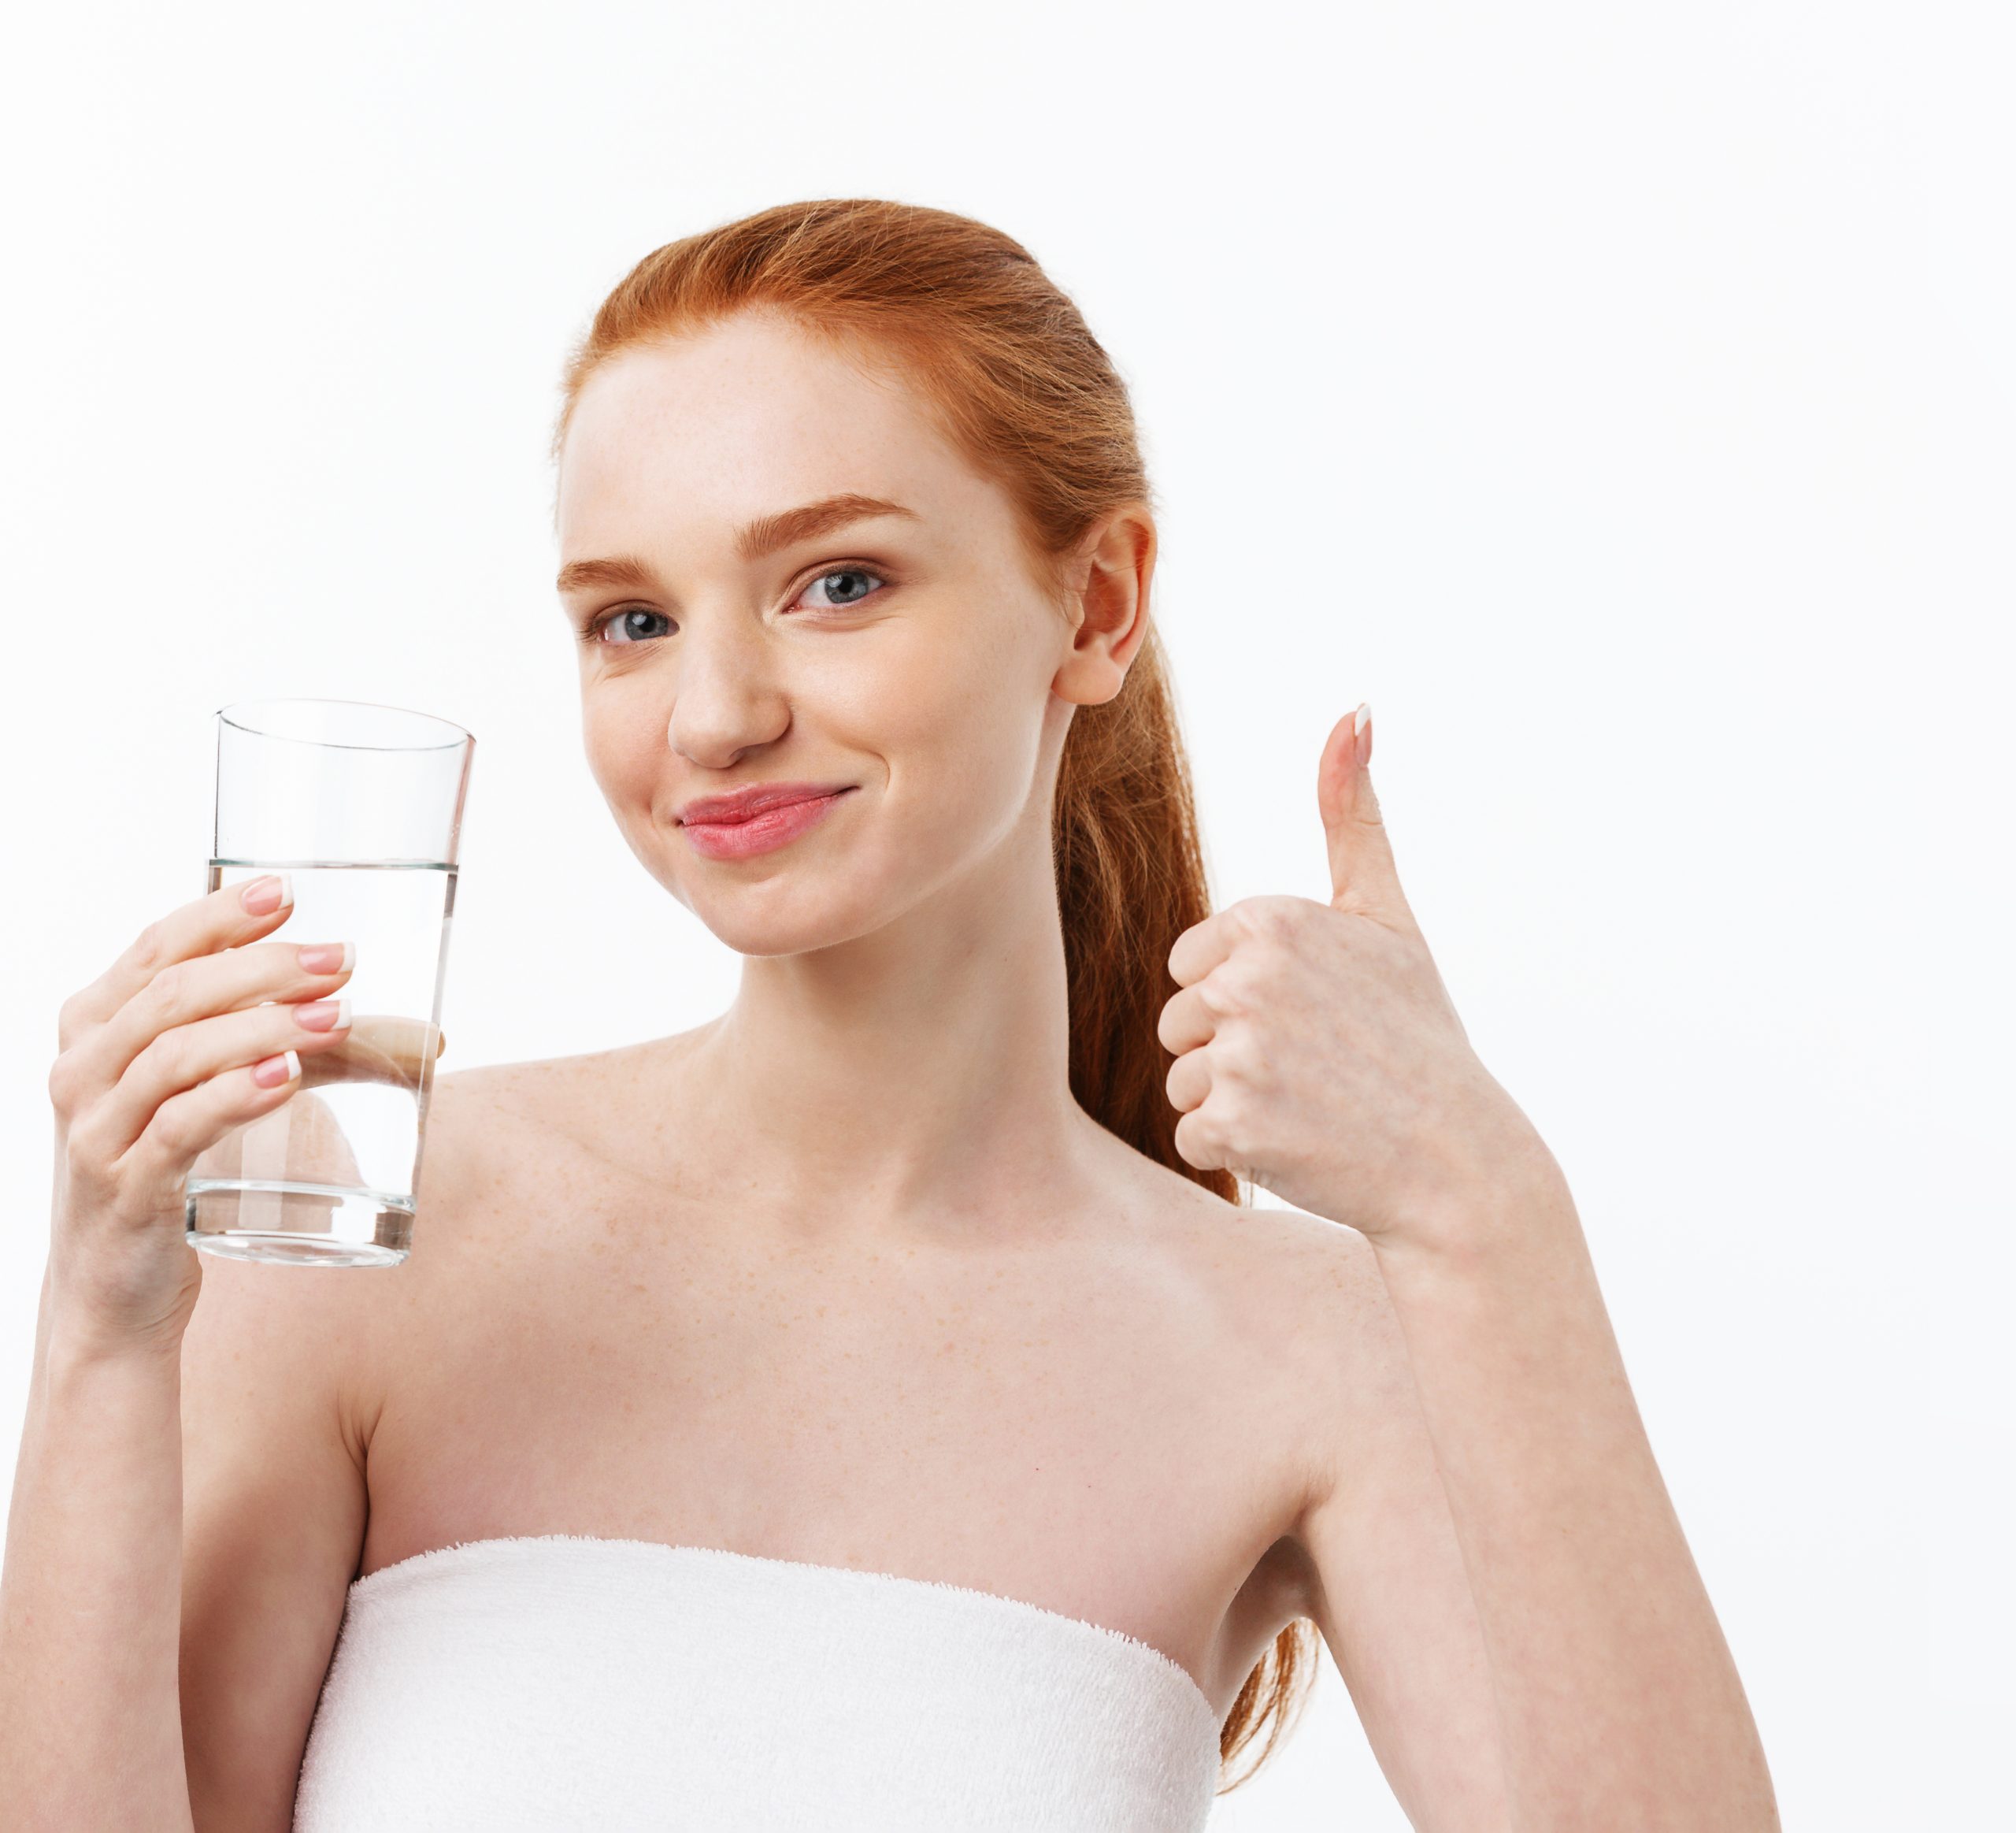 Health, people, food, sports, lifestyle and beauty content - Smiling Young Woman with glass of Water